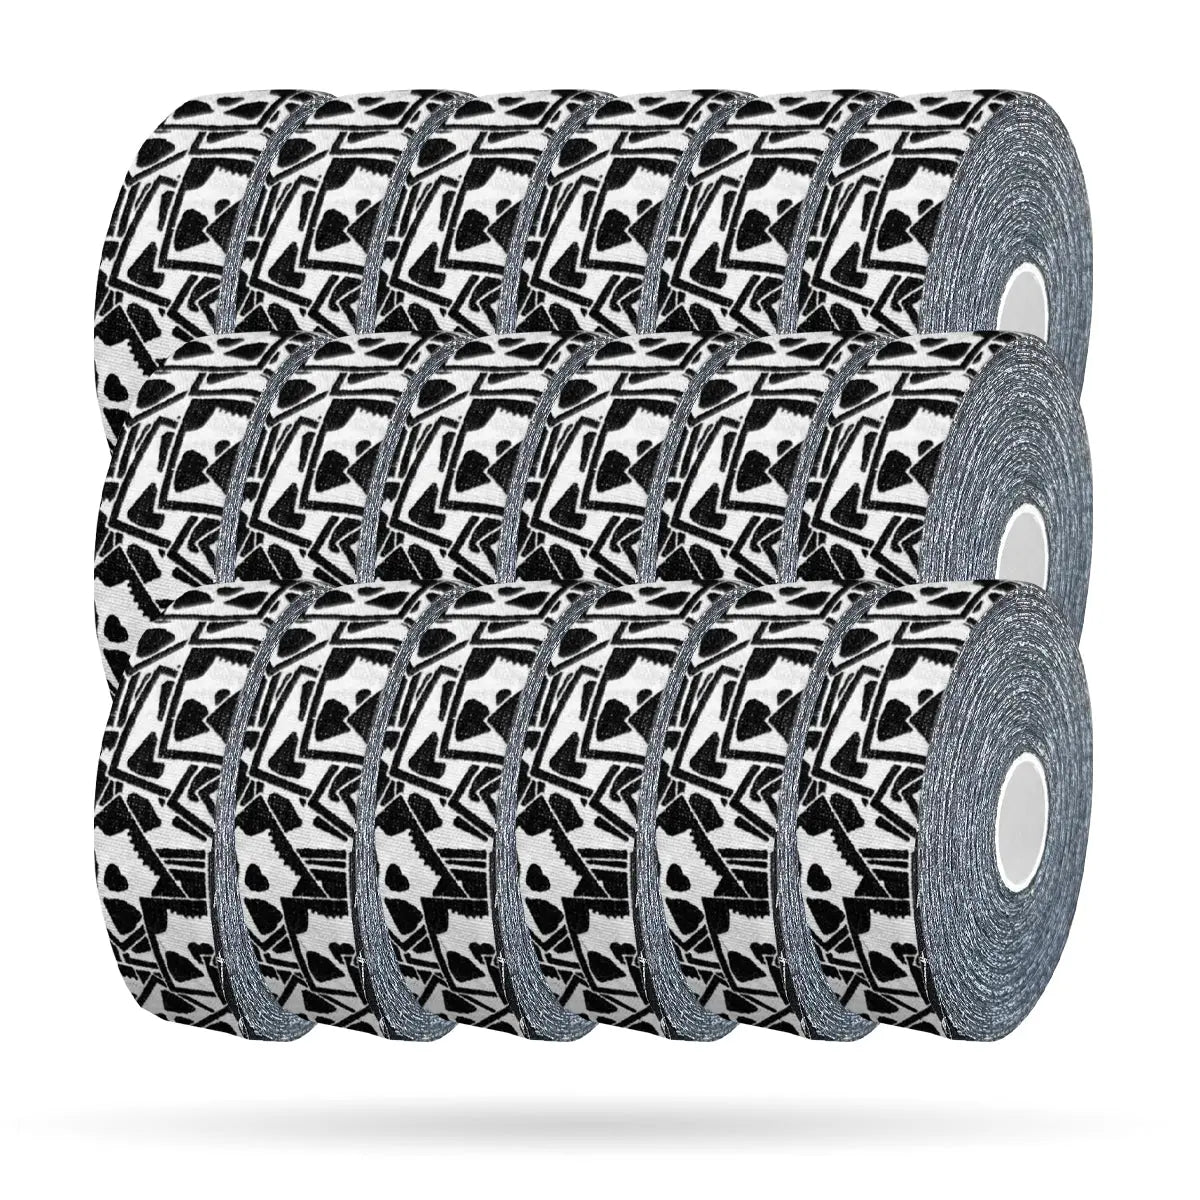 Team Pack Tape Bundle - 18 Pack Infamous Paintball